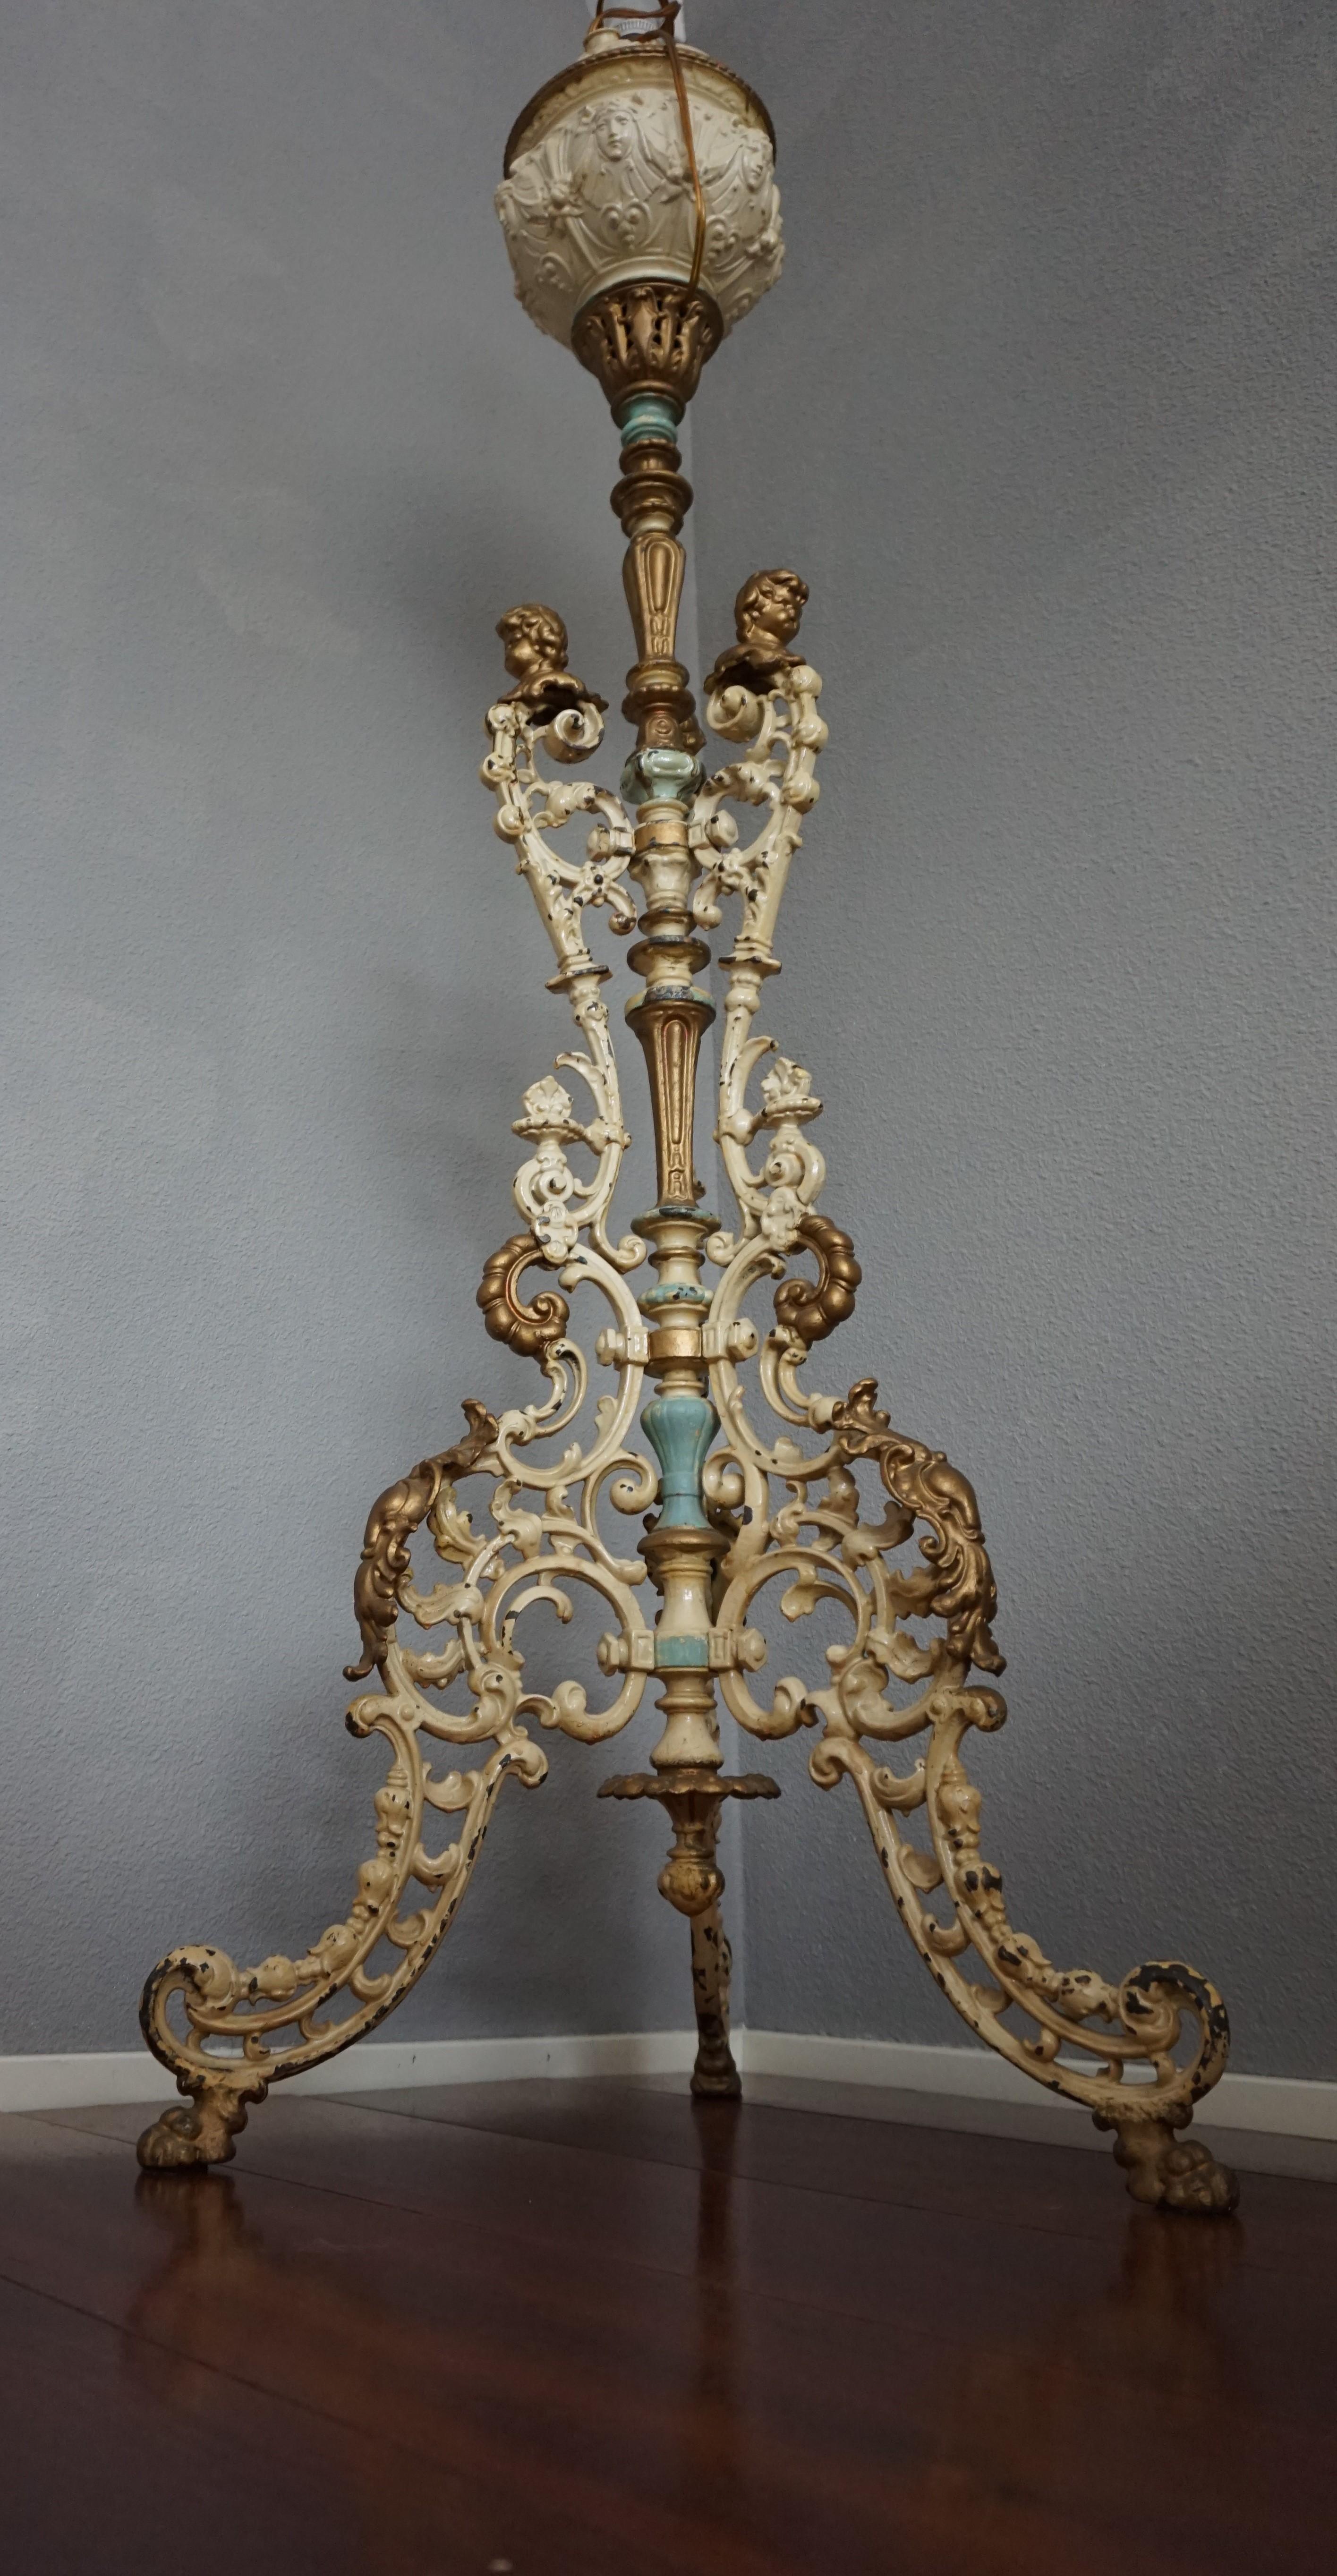 Antique and Painted Cast Iron Baroque Revival Floor Lamp w. Putti Bust Sculpture For Sale 1